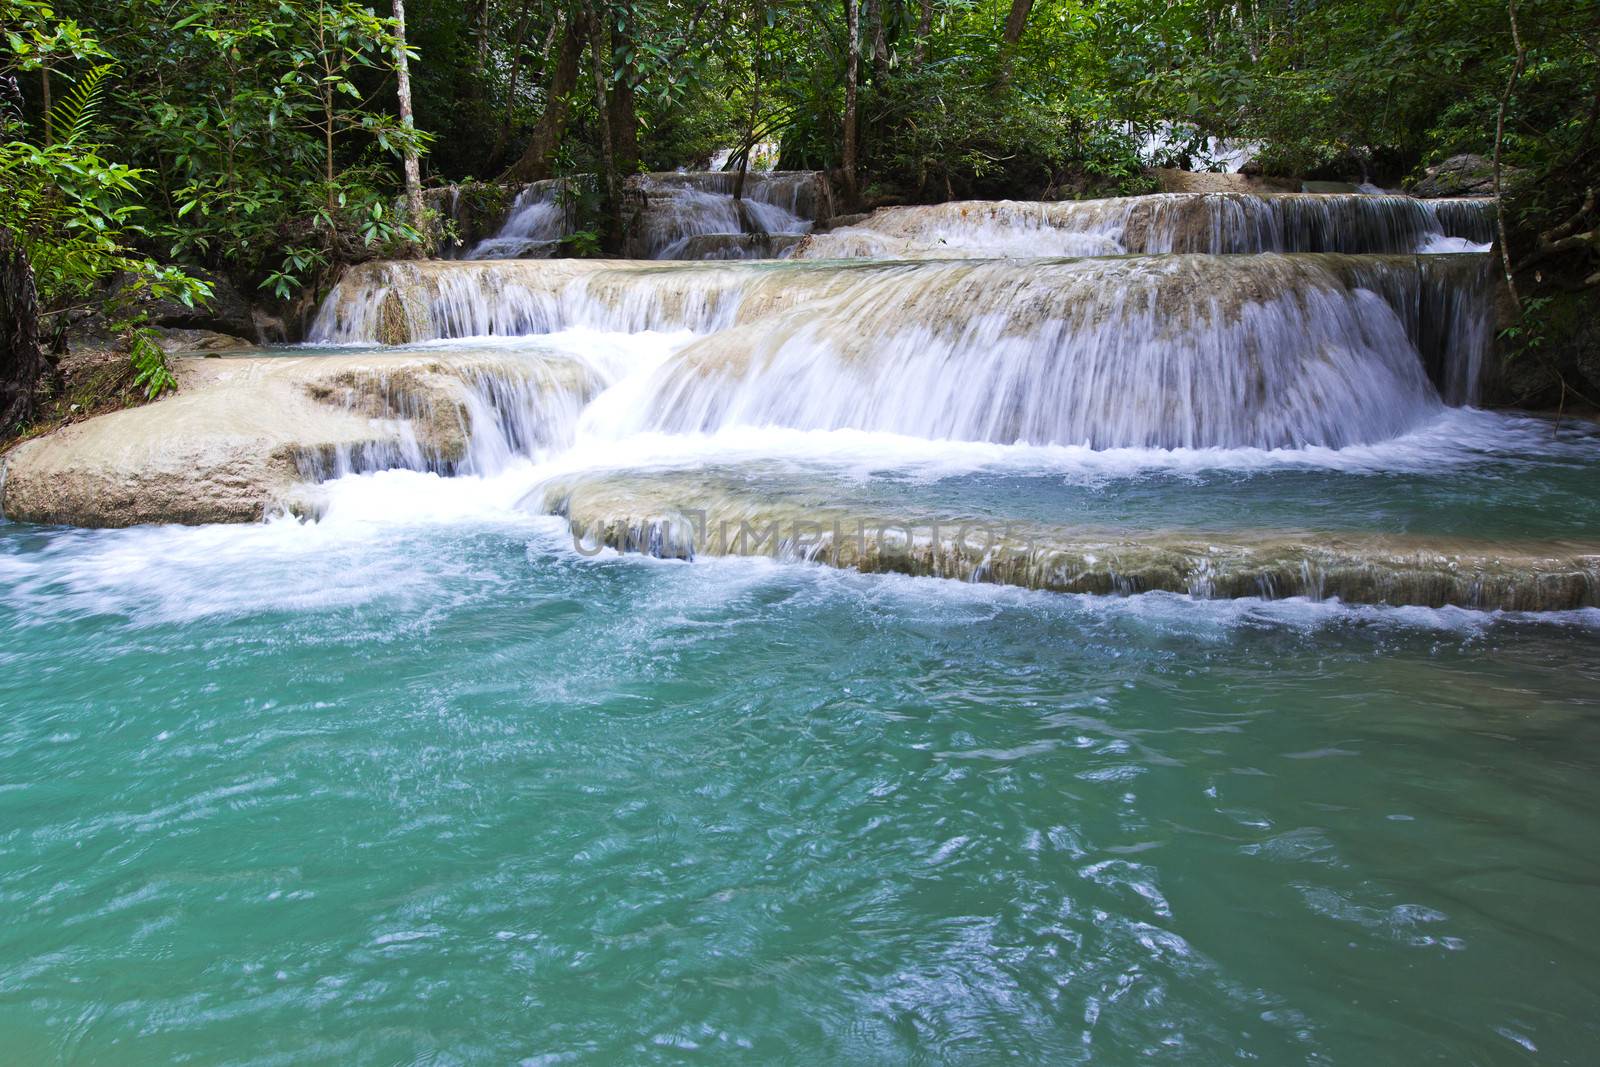 Some part of the seven layer waterfall in Erawan waterfall